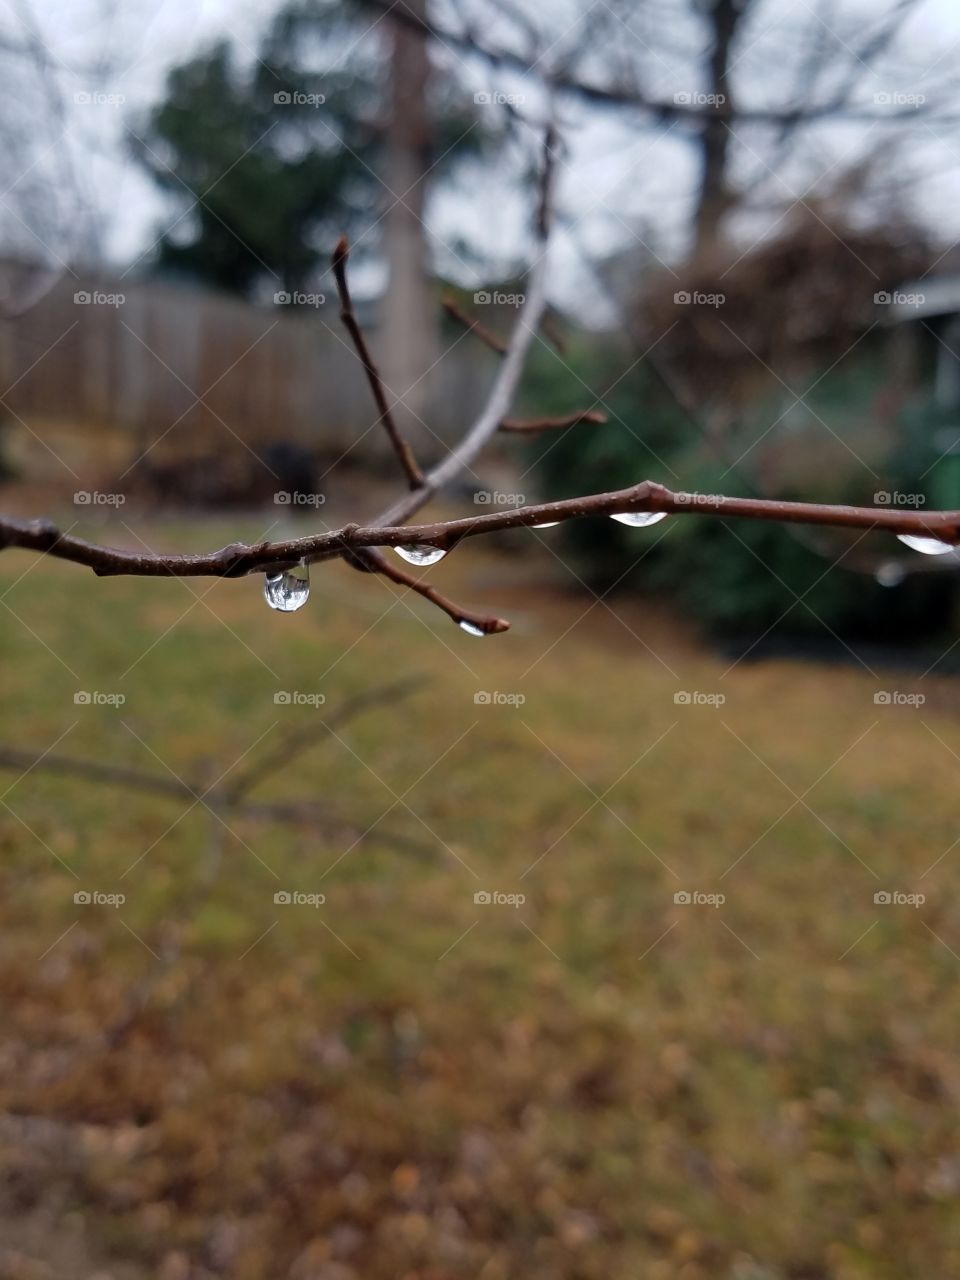 First photo of the new year is rain drops hanging on to the branches